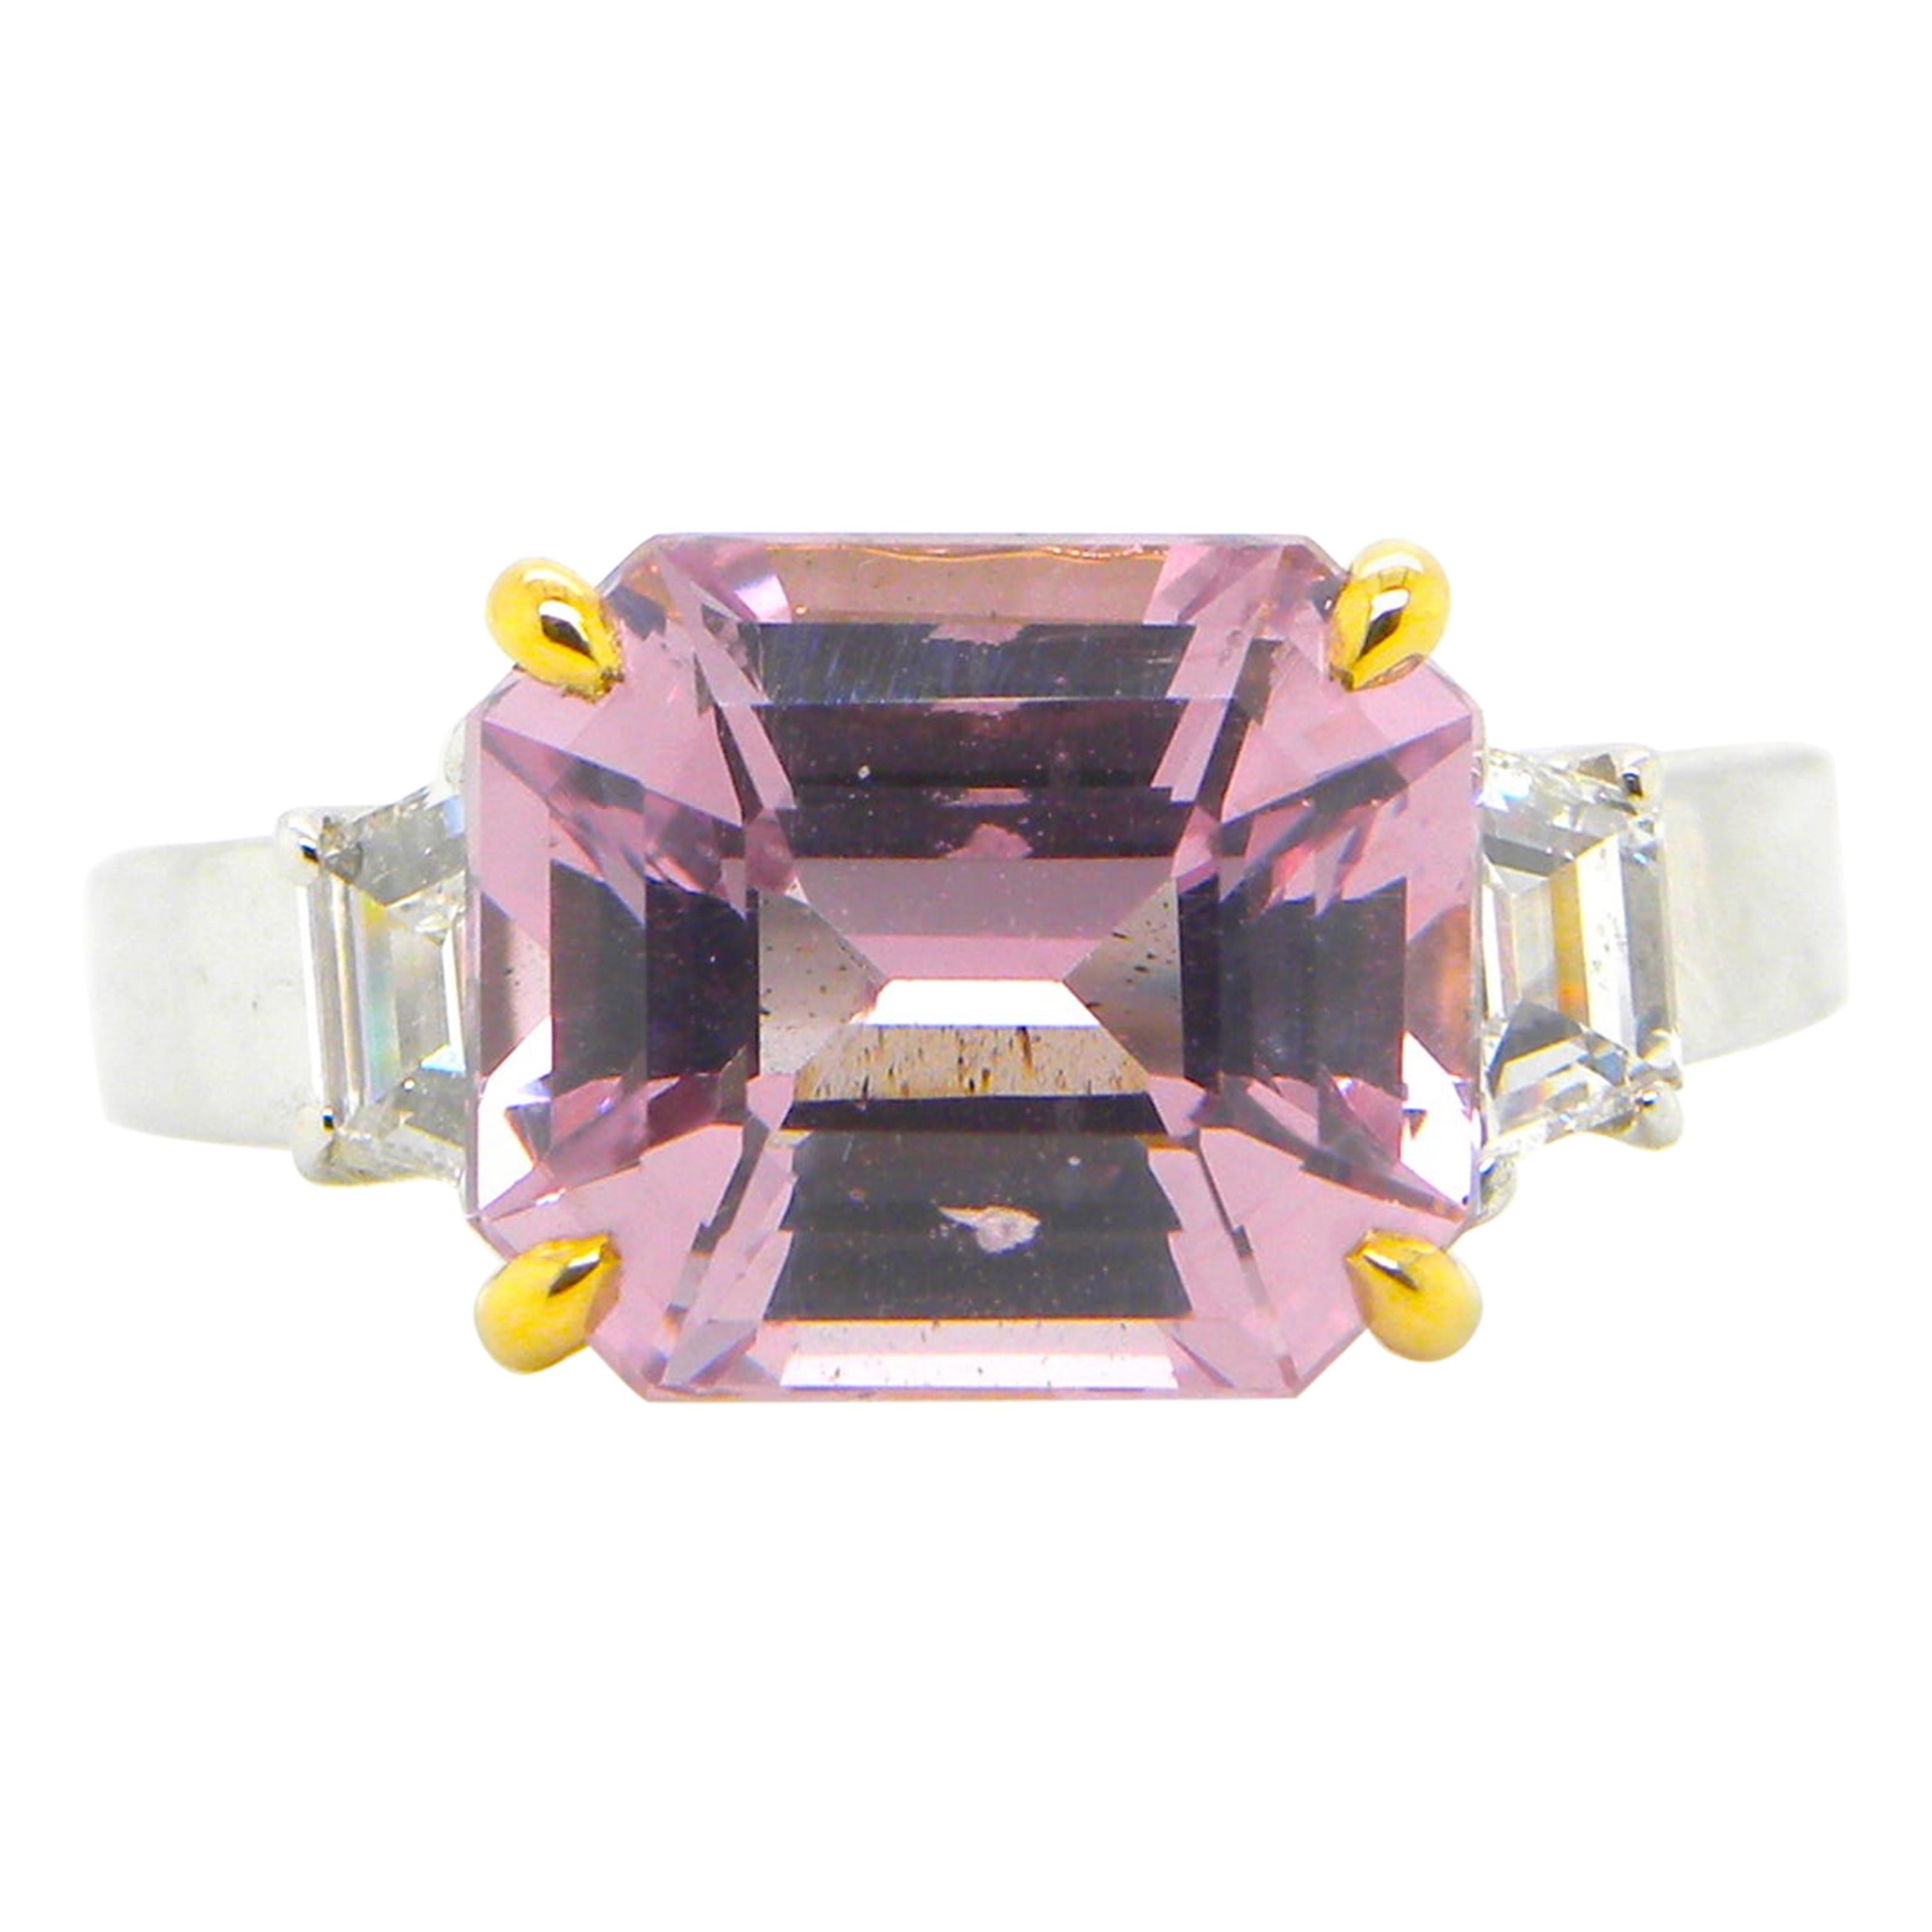 4.22 Carat Unheated Burmese Pink Spinel and White Diamond Engagement Ring